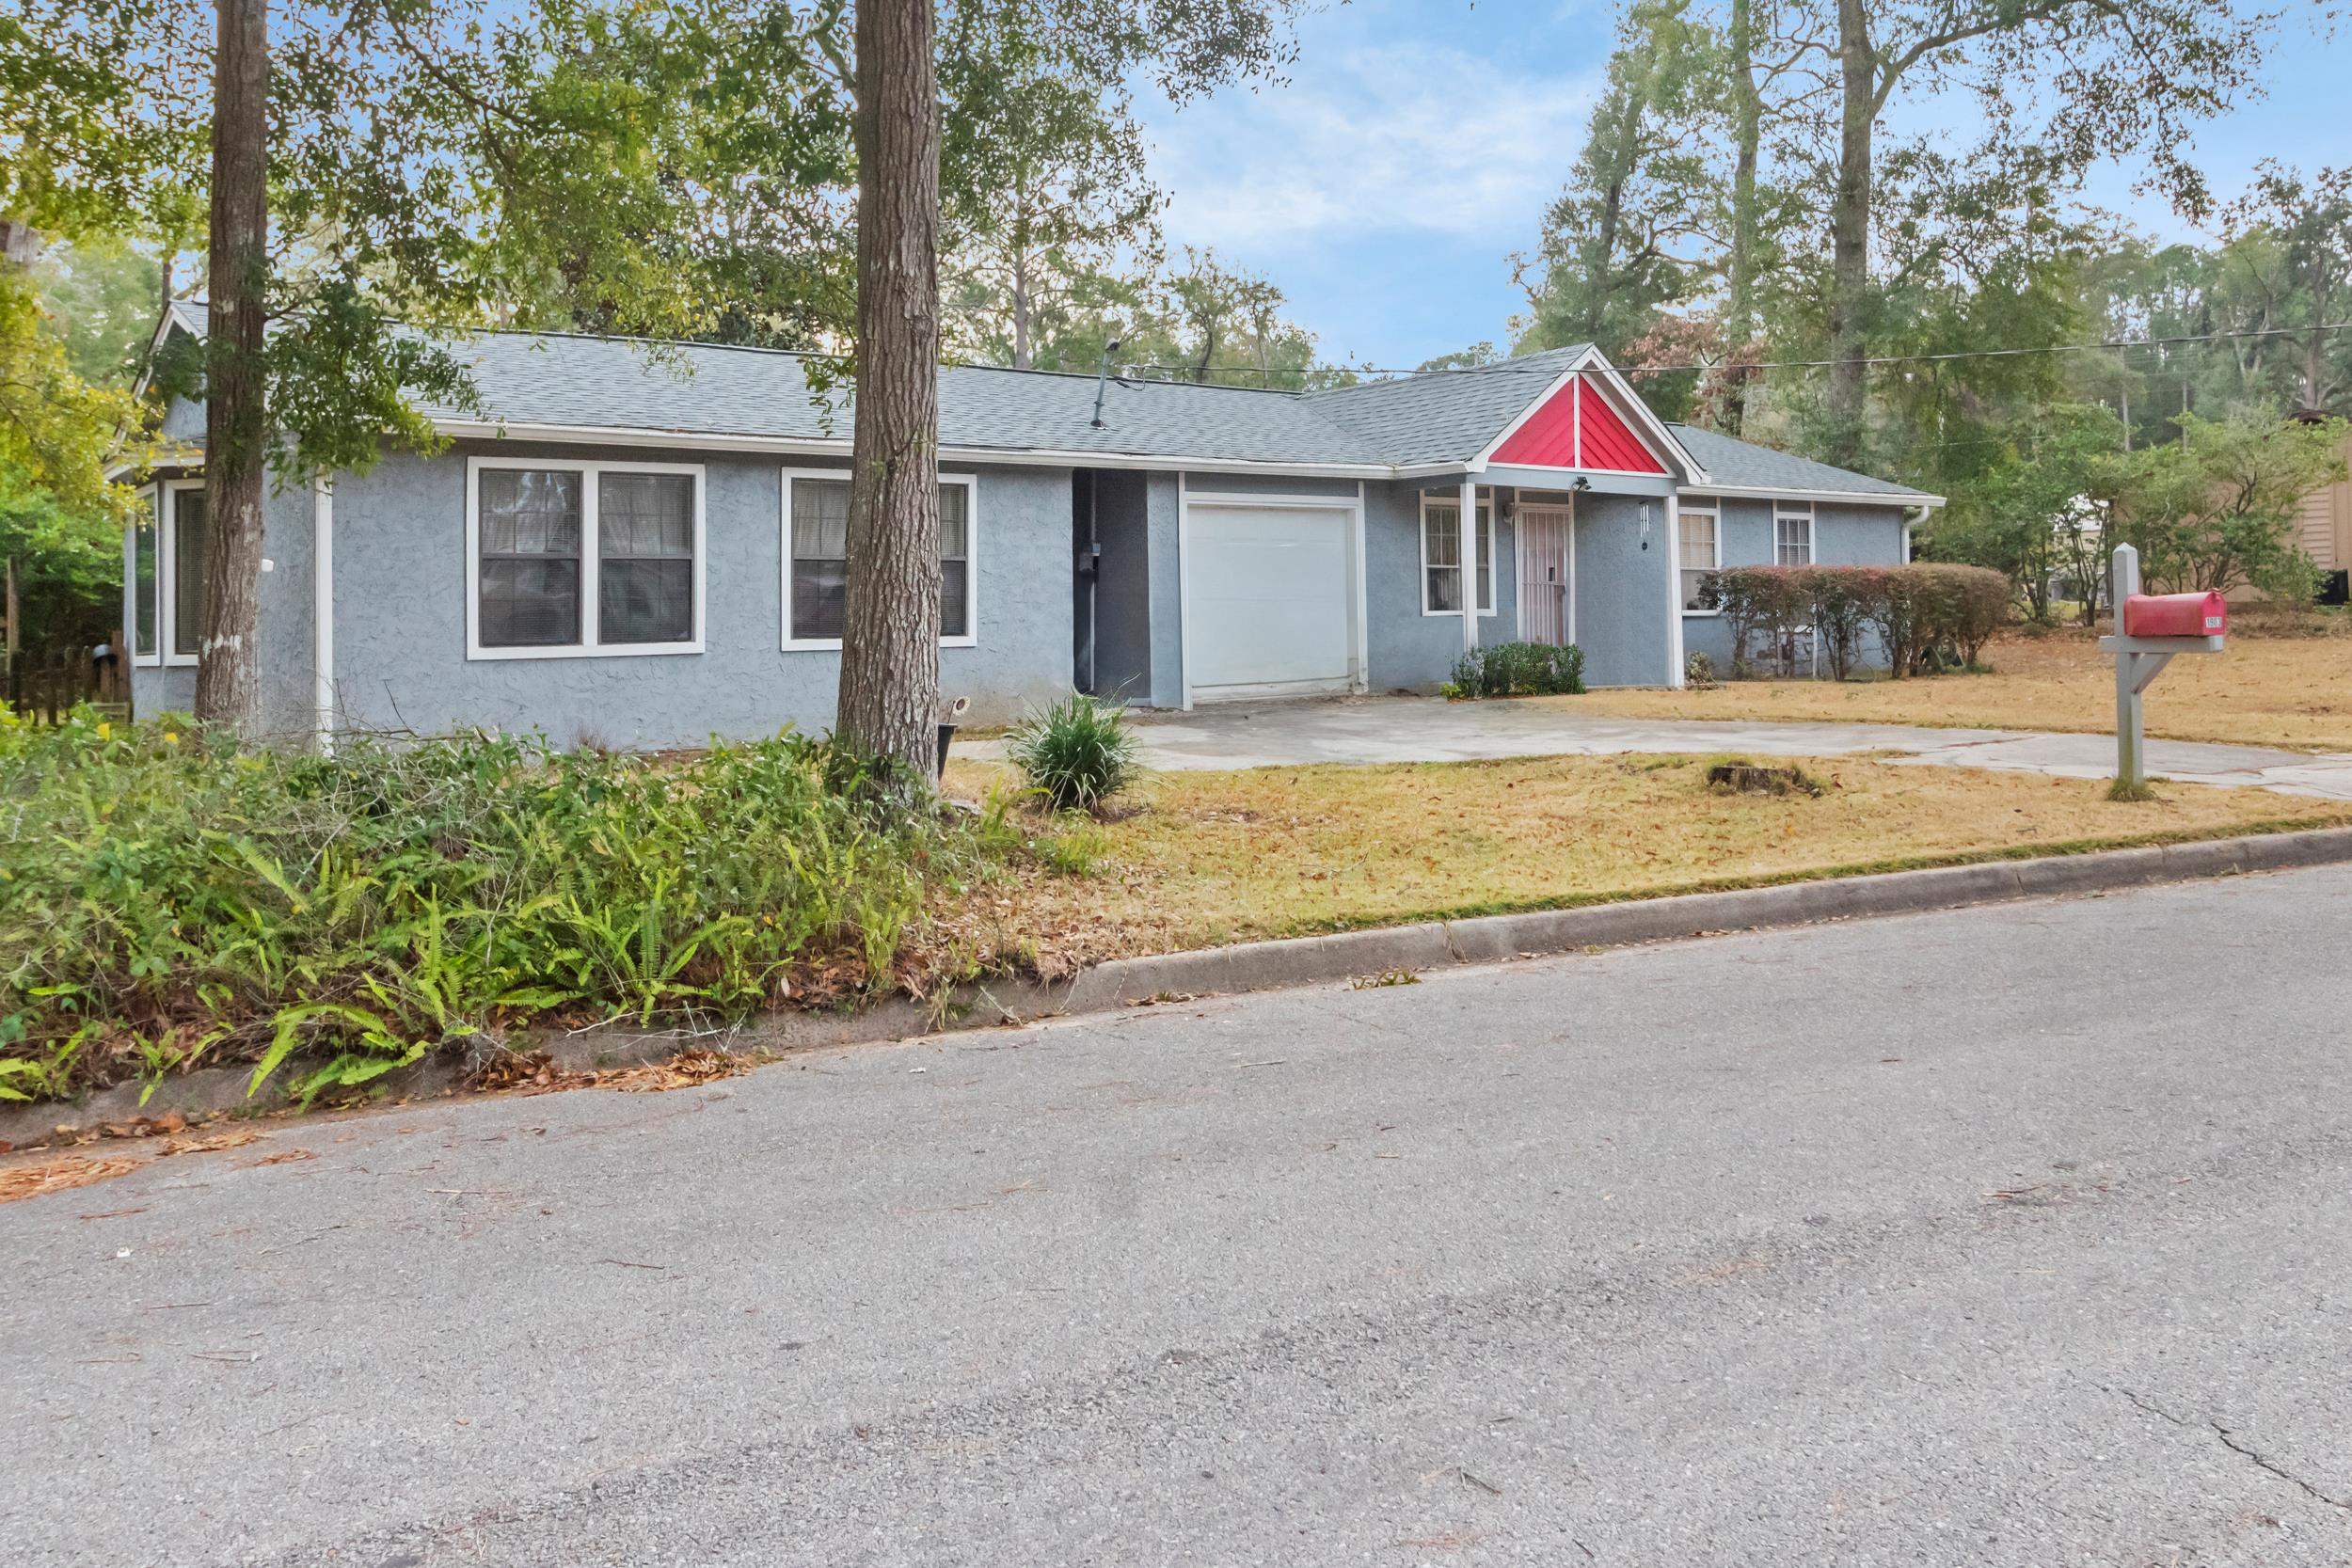 1903 Trapnell Street,TALLAHASSEE,Florida 32310,4 Bedrooms Bedrooms,2 BathroomsBathrooms,Detached single family,1903 Trapnell Street,366880